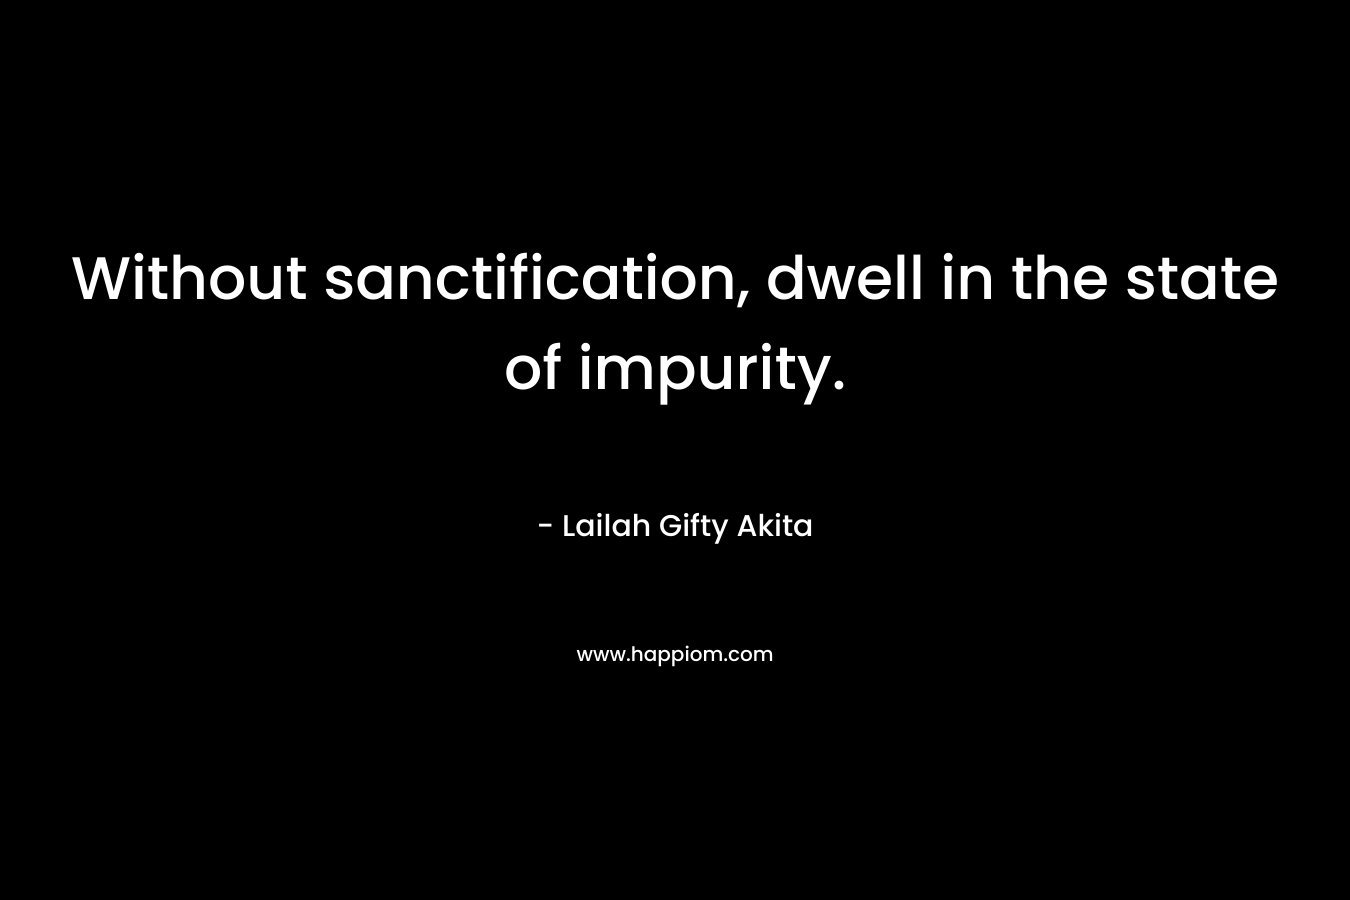 Without sanctification, dwell in the state of impurity.